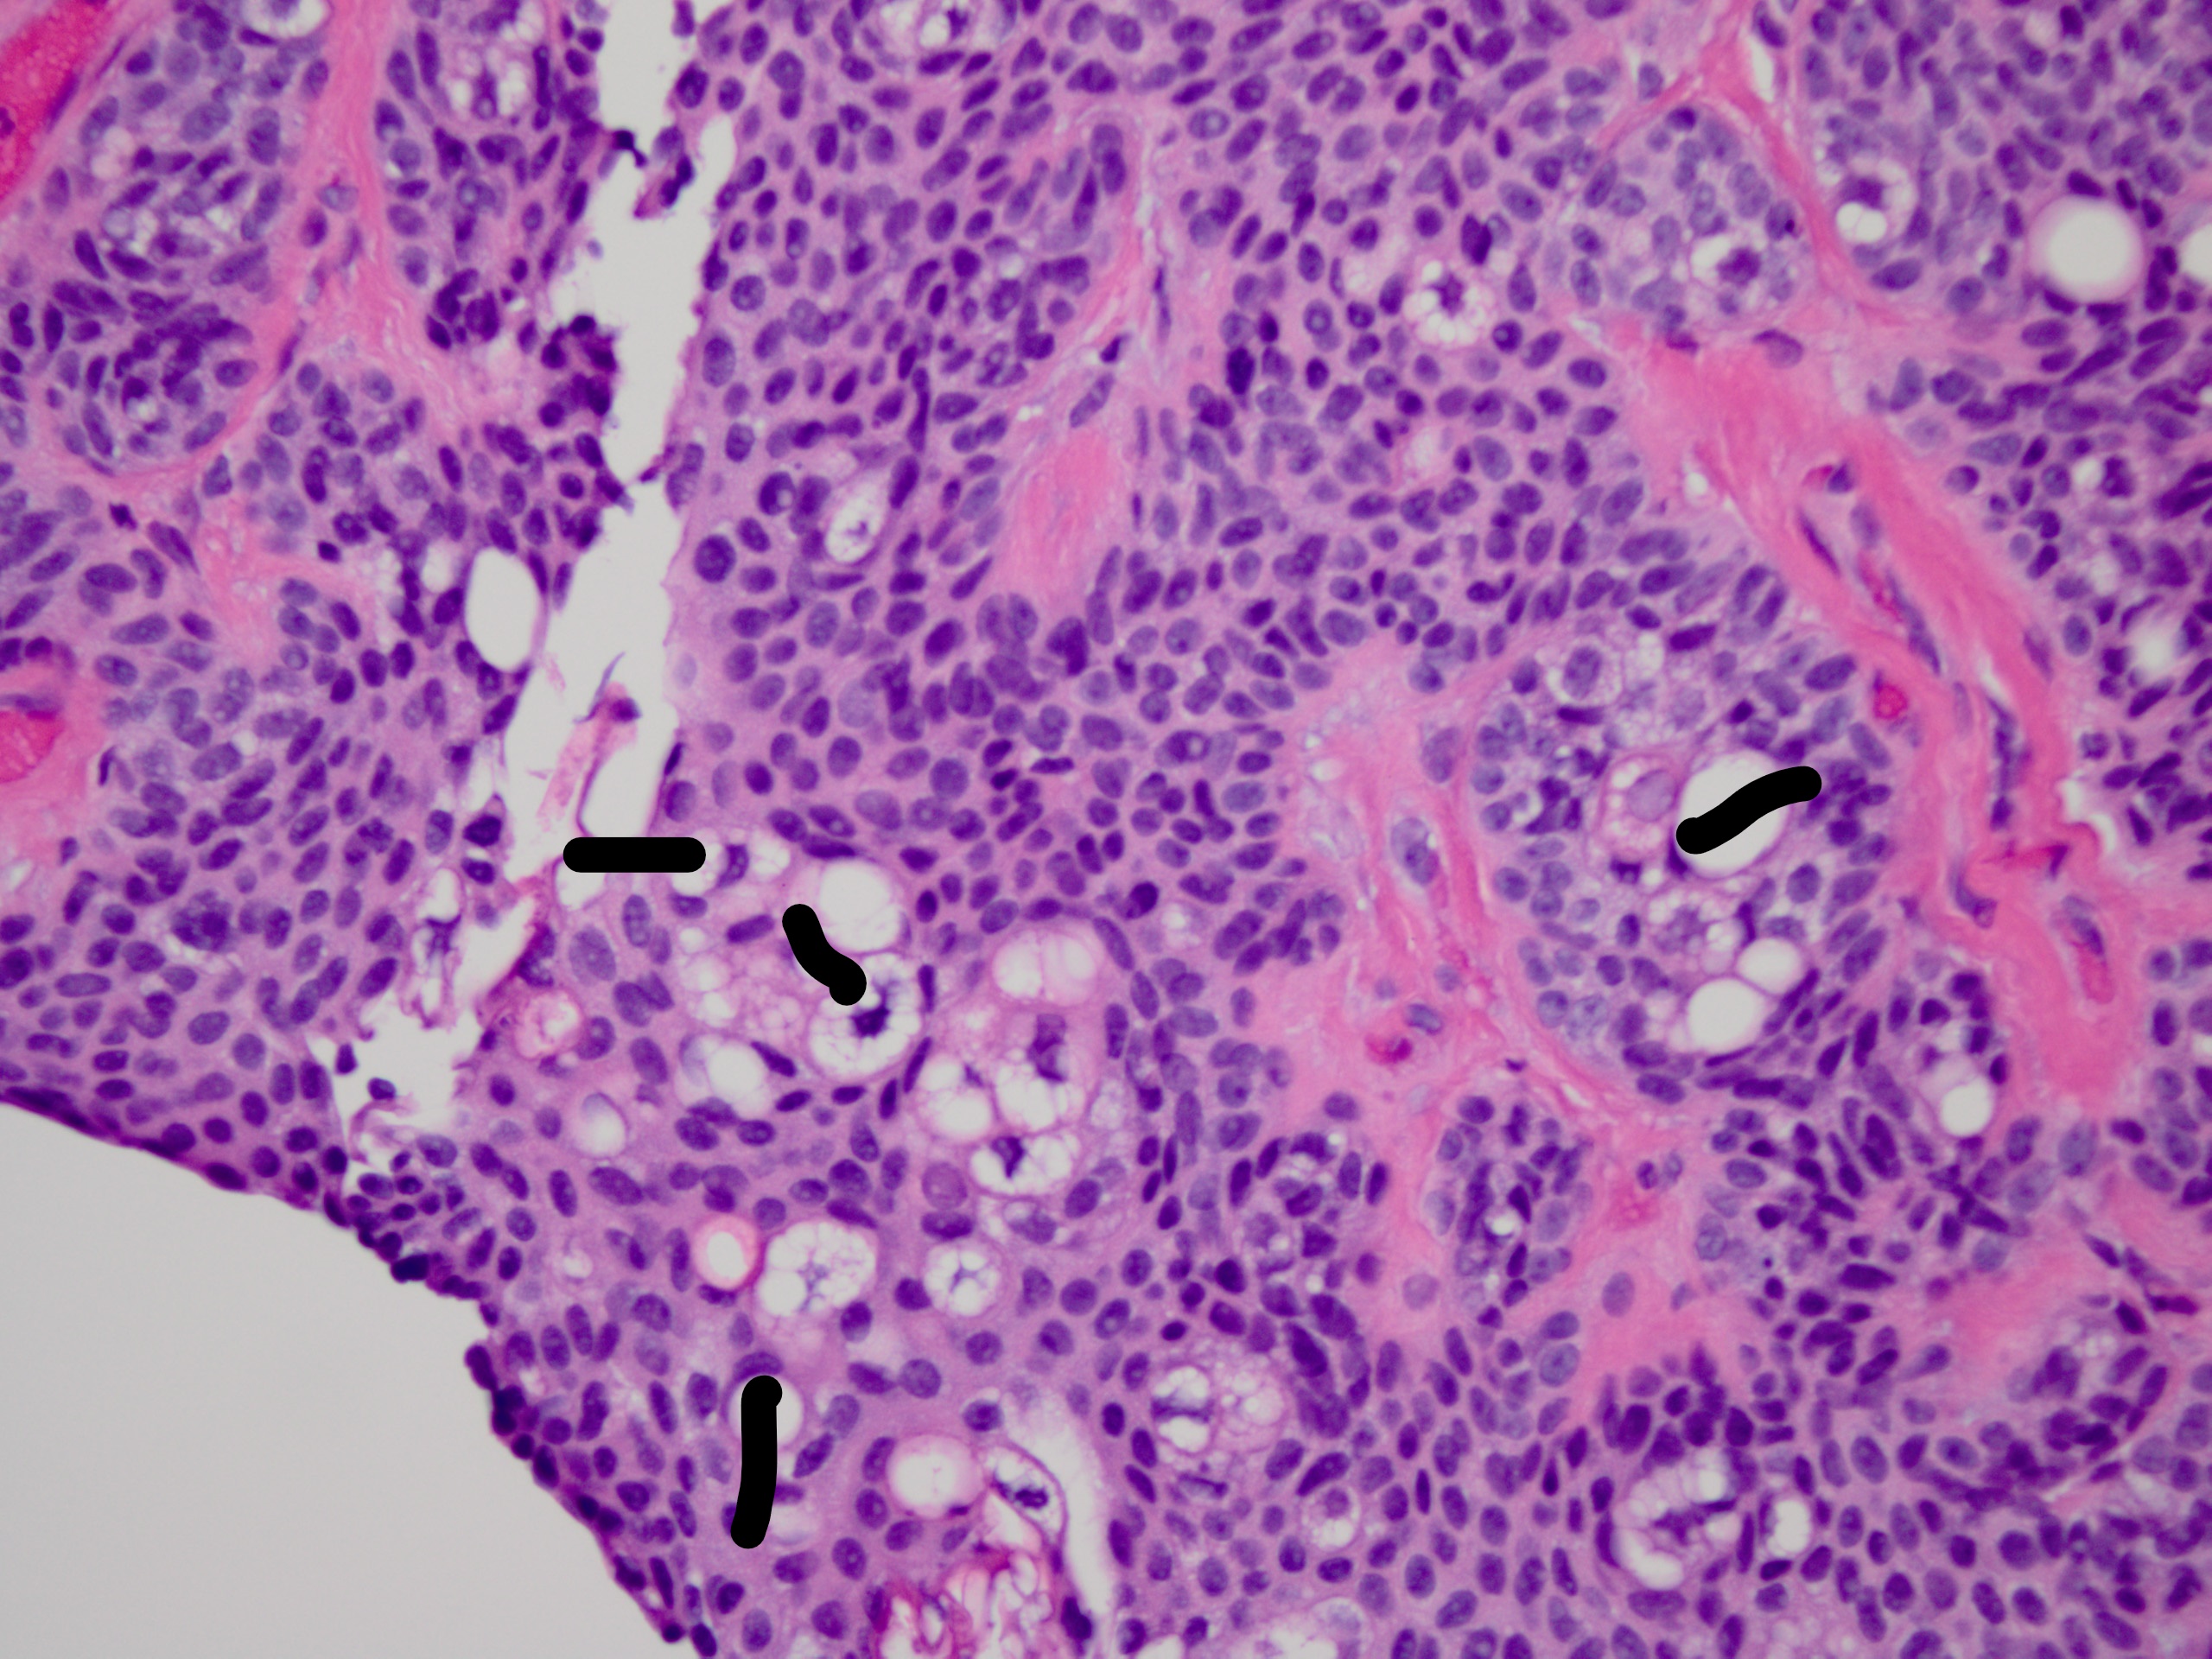 Sebocytes have a soap bubble appearance. Their nuclei are scalloped or indented (black marks).